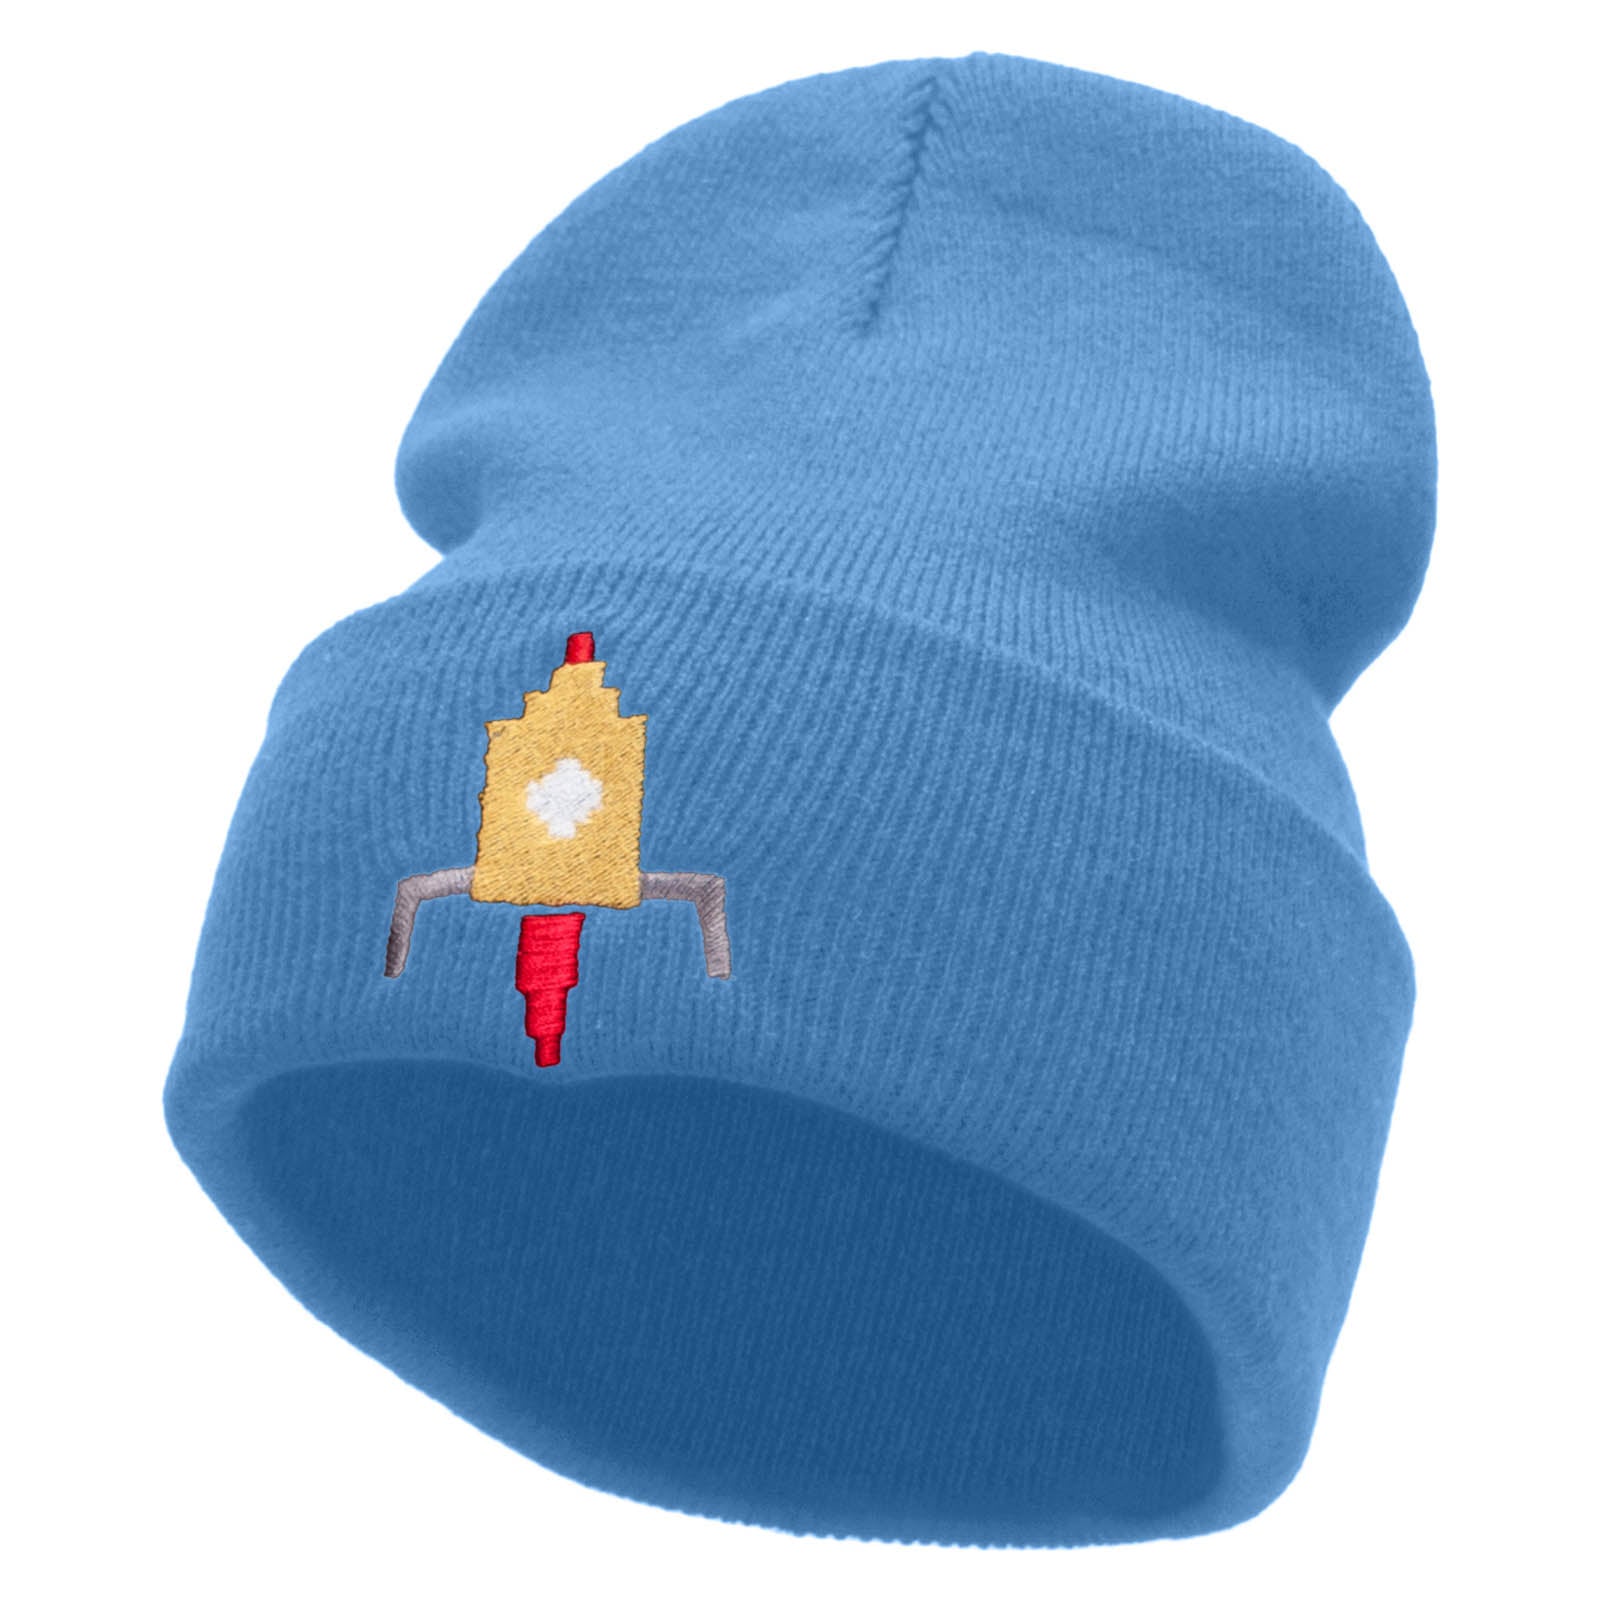 Space Ship Embroidered 12 Inch Long Knitted Beanie - Sky Blue OSFM